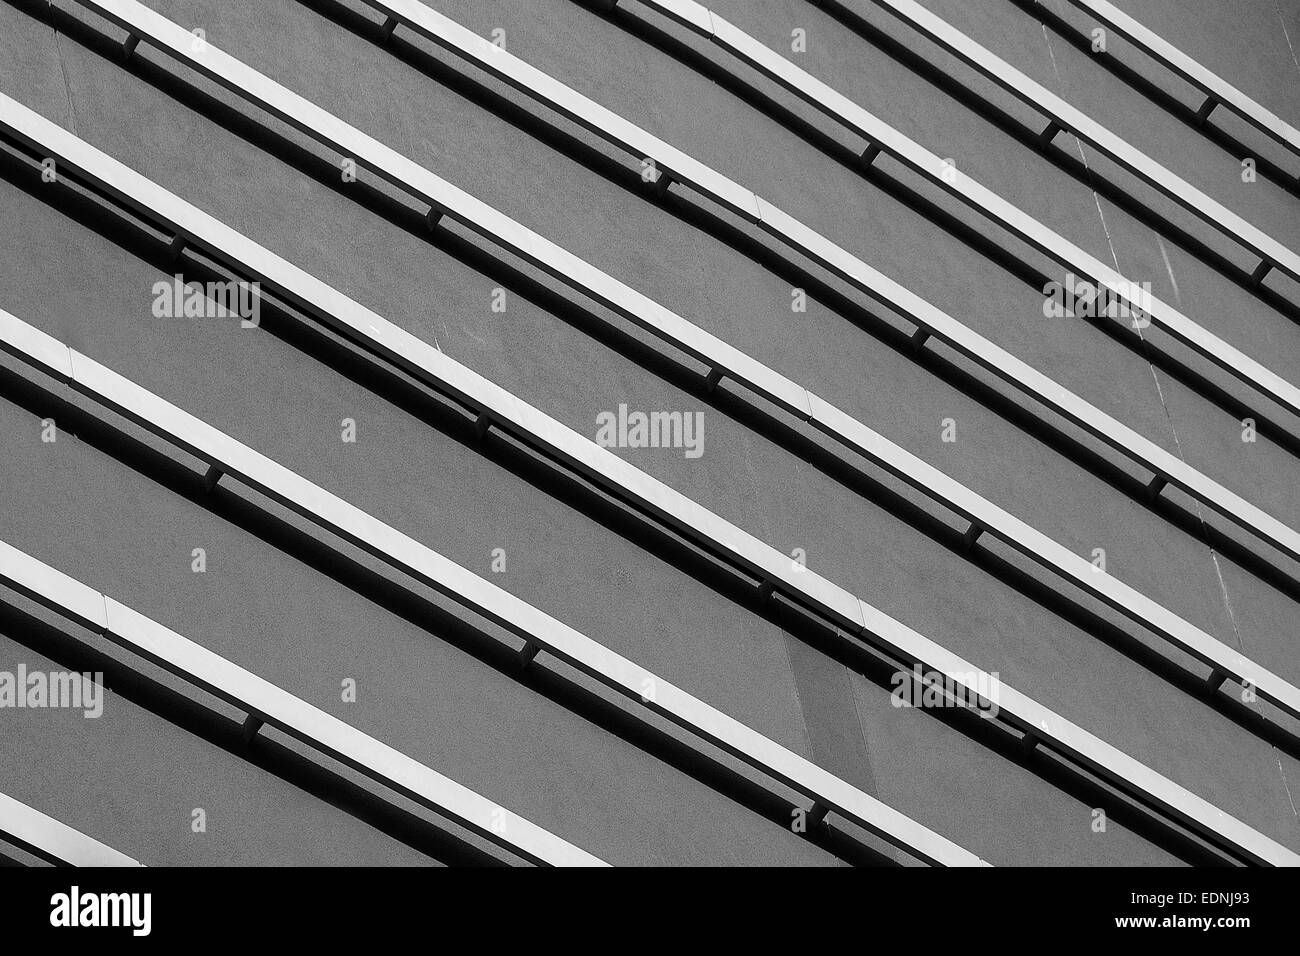 Abstract architecture black and white Stock Photo